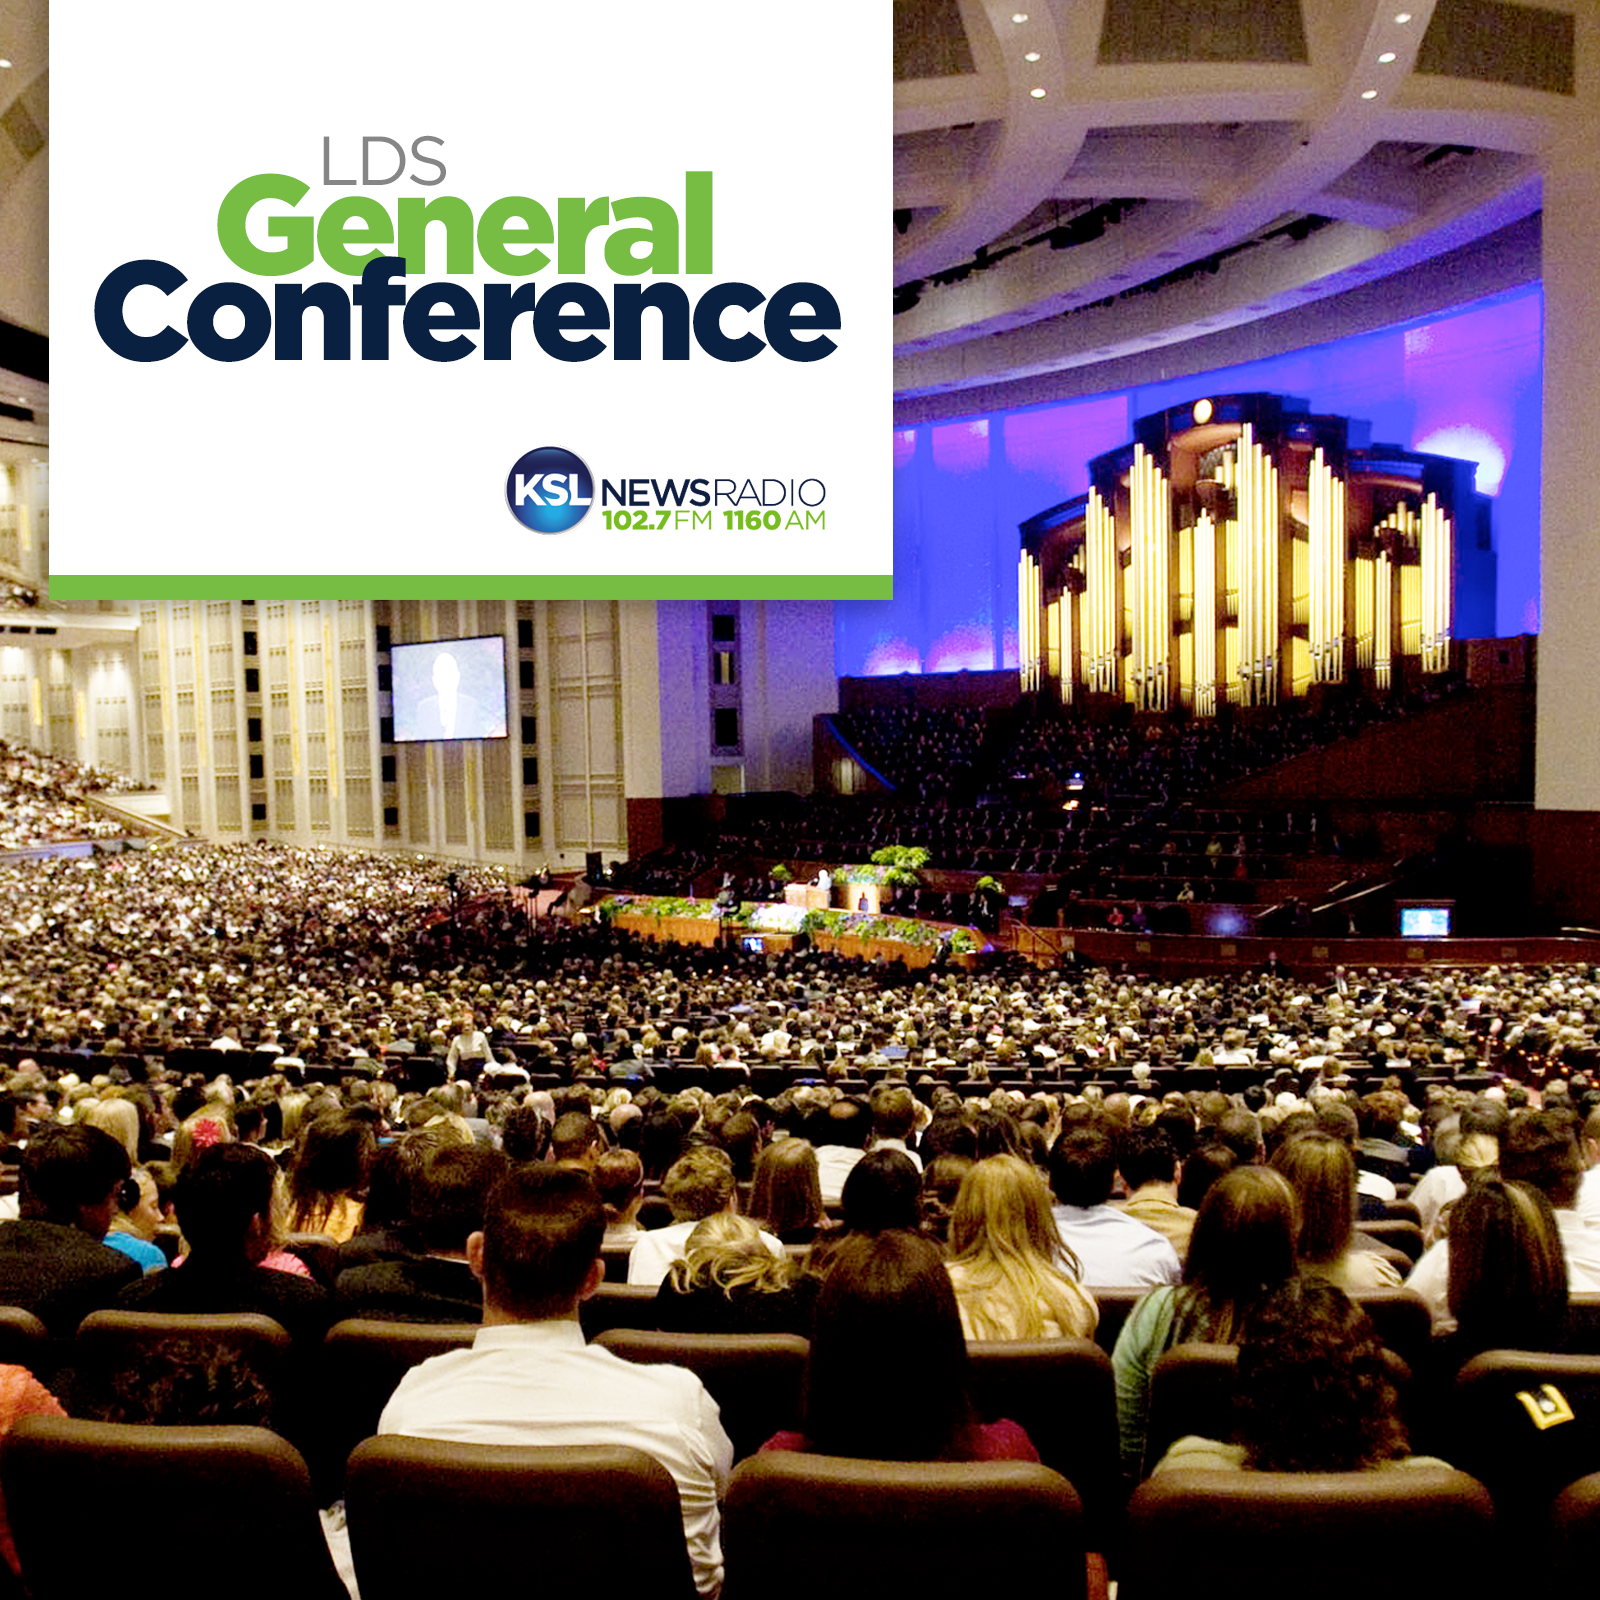 The Sunday Morning session of the 187th LDS General Conference October 1, 2017